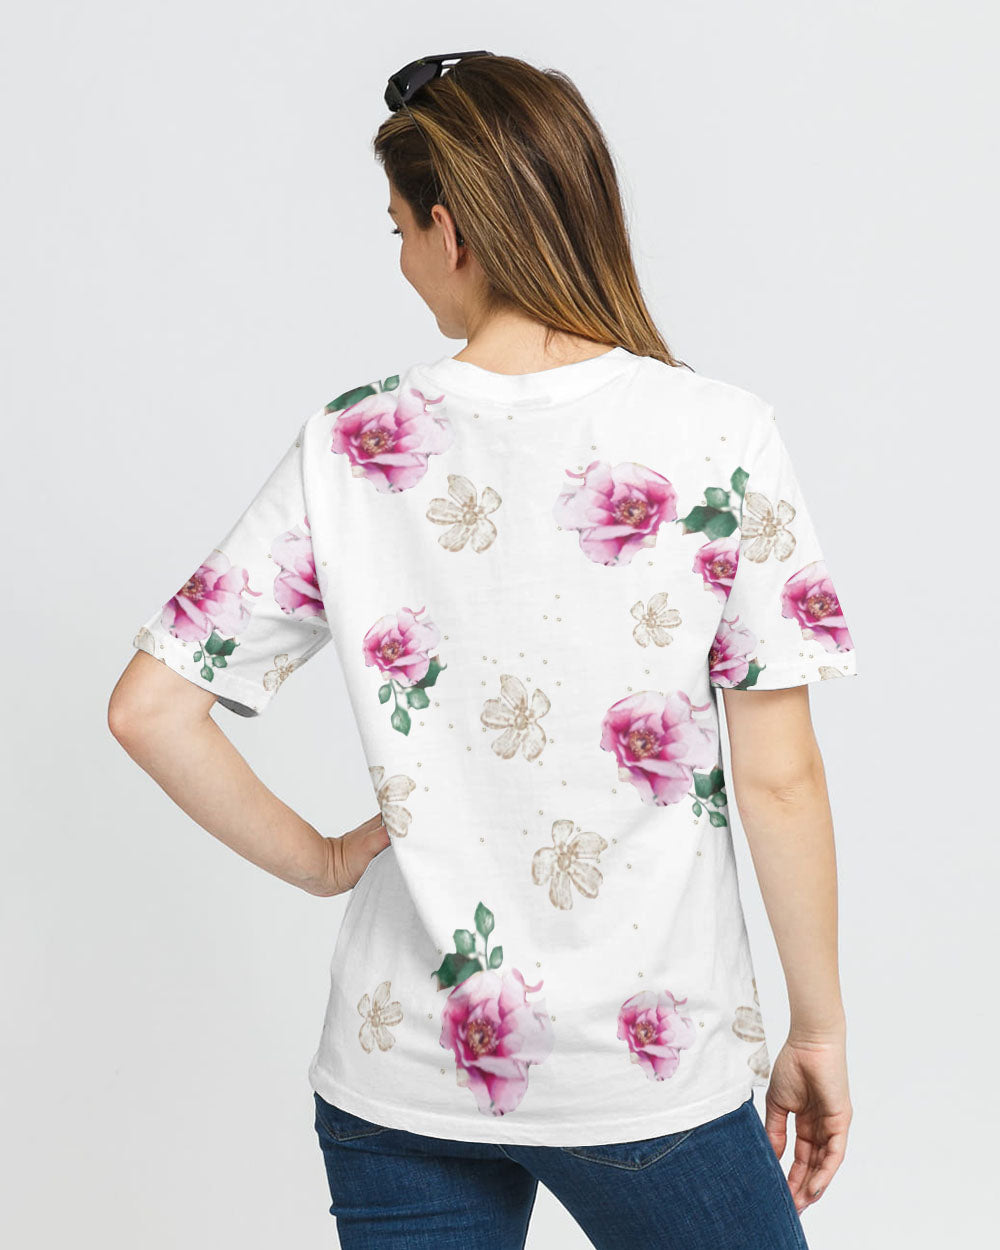 Butterfly Floral Ribbon Women's Breast Cancer Awareness Tshirt